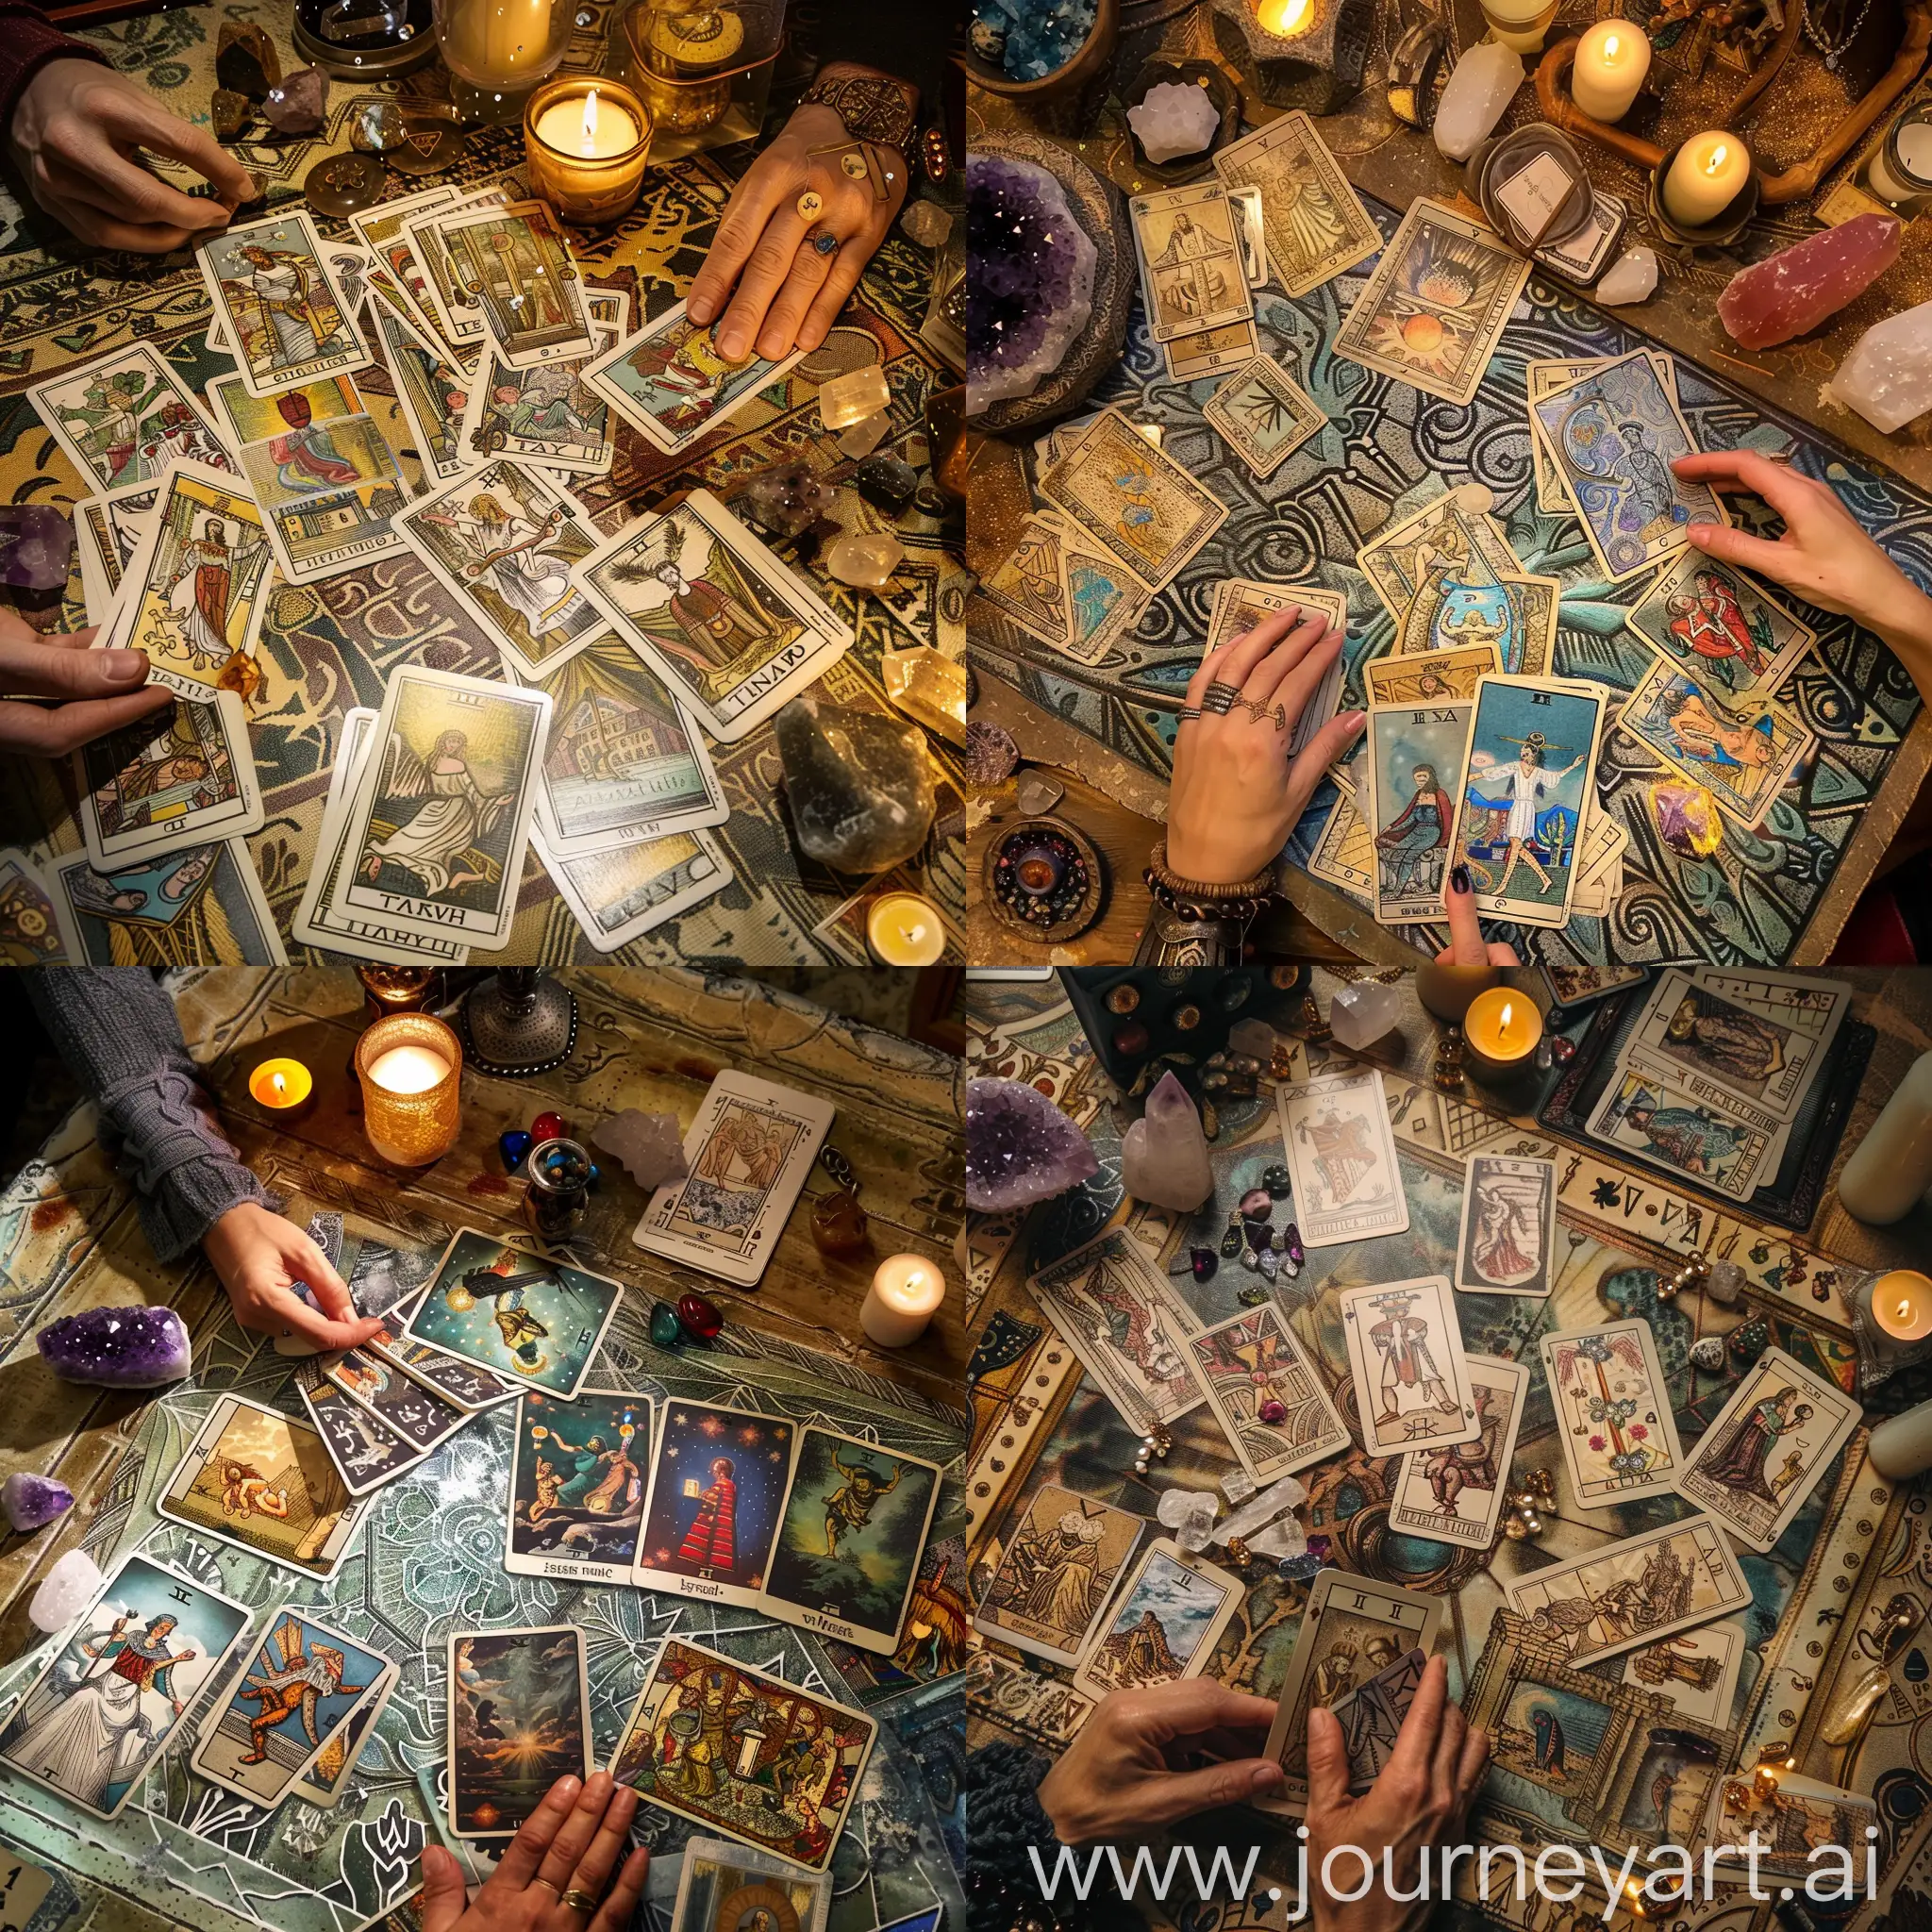 Tarologists-Table-with-Scattered-Tarot-Cards-and-Mystic-Accessories